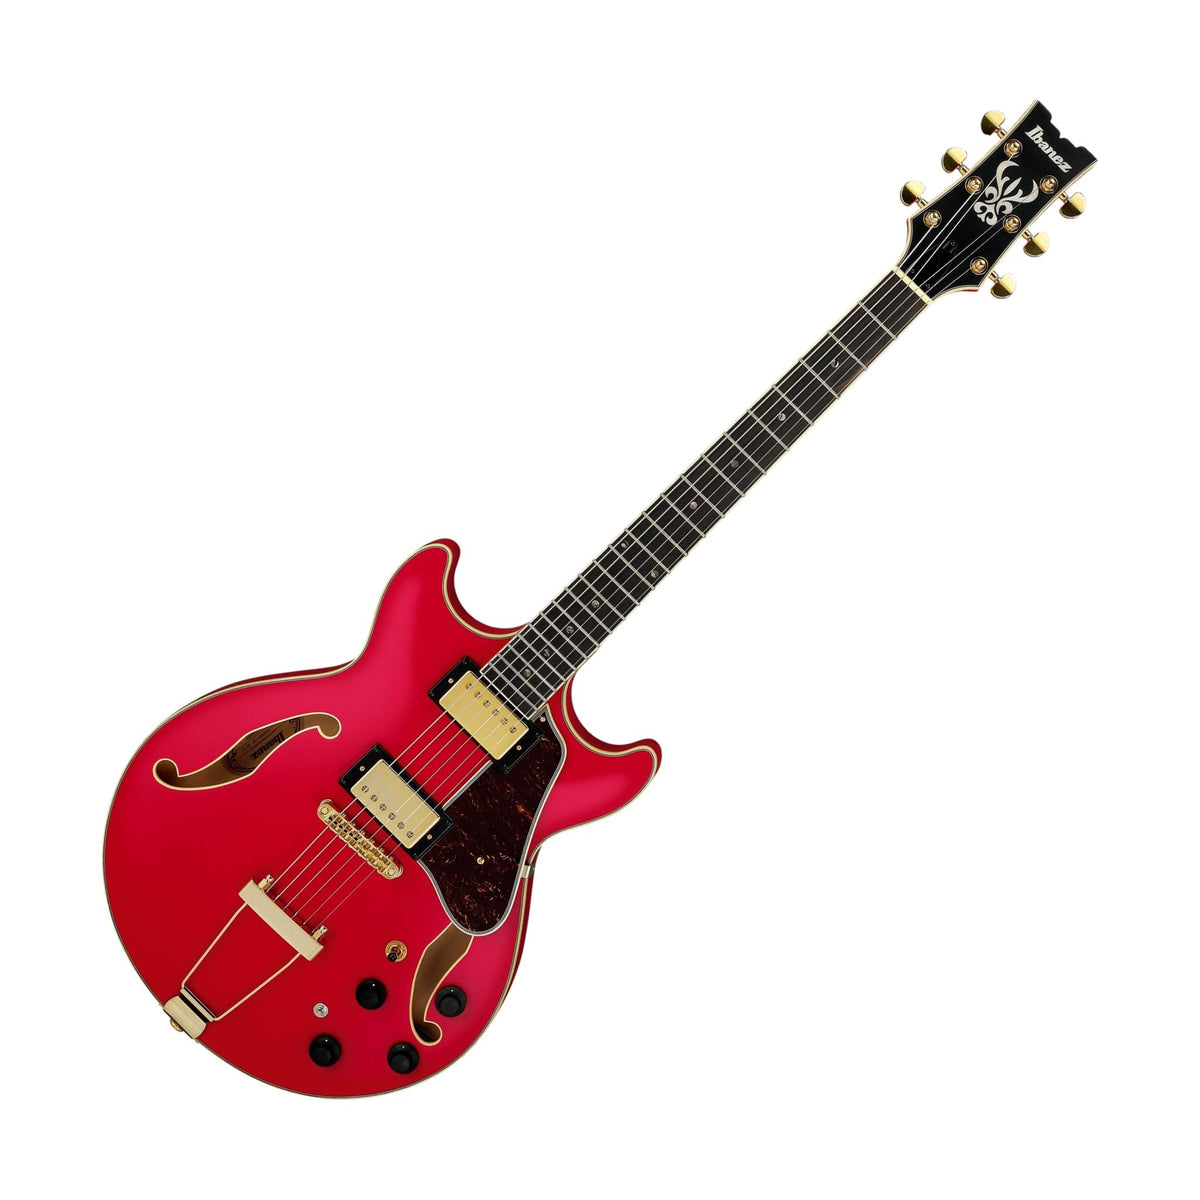 Ibanez AMH90 Artcore Hollowbody Electric Guitar Cherry Red Fat